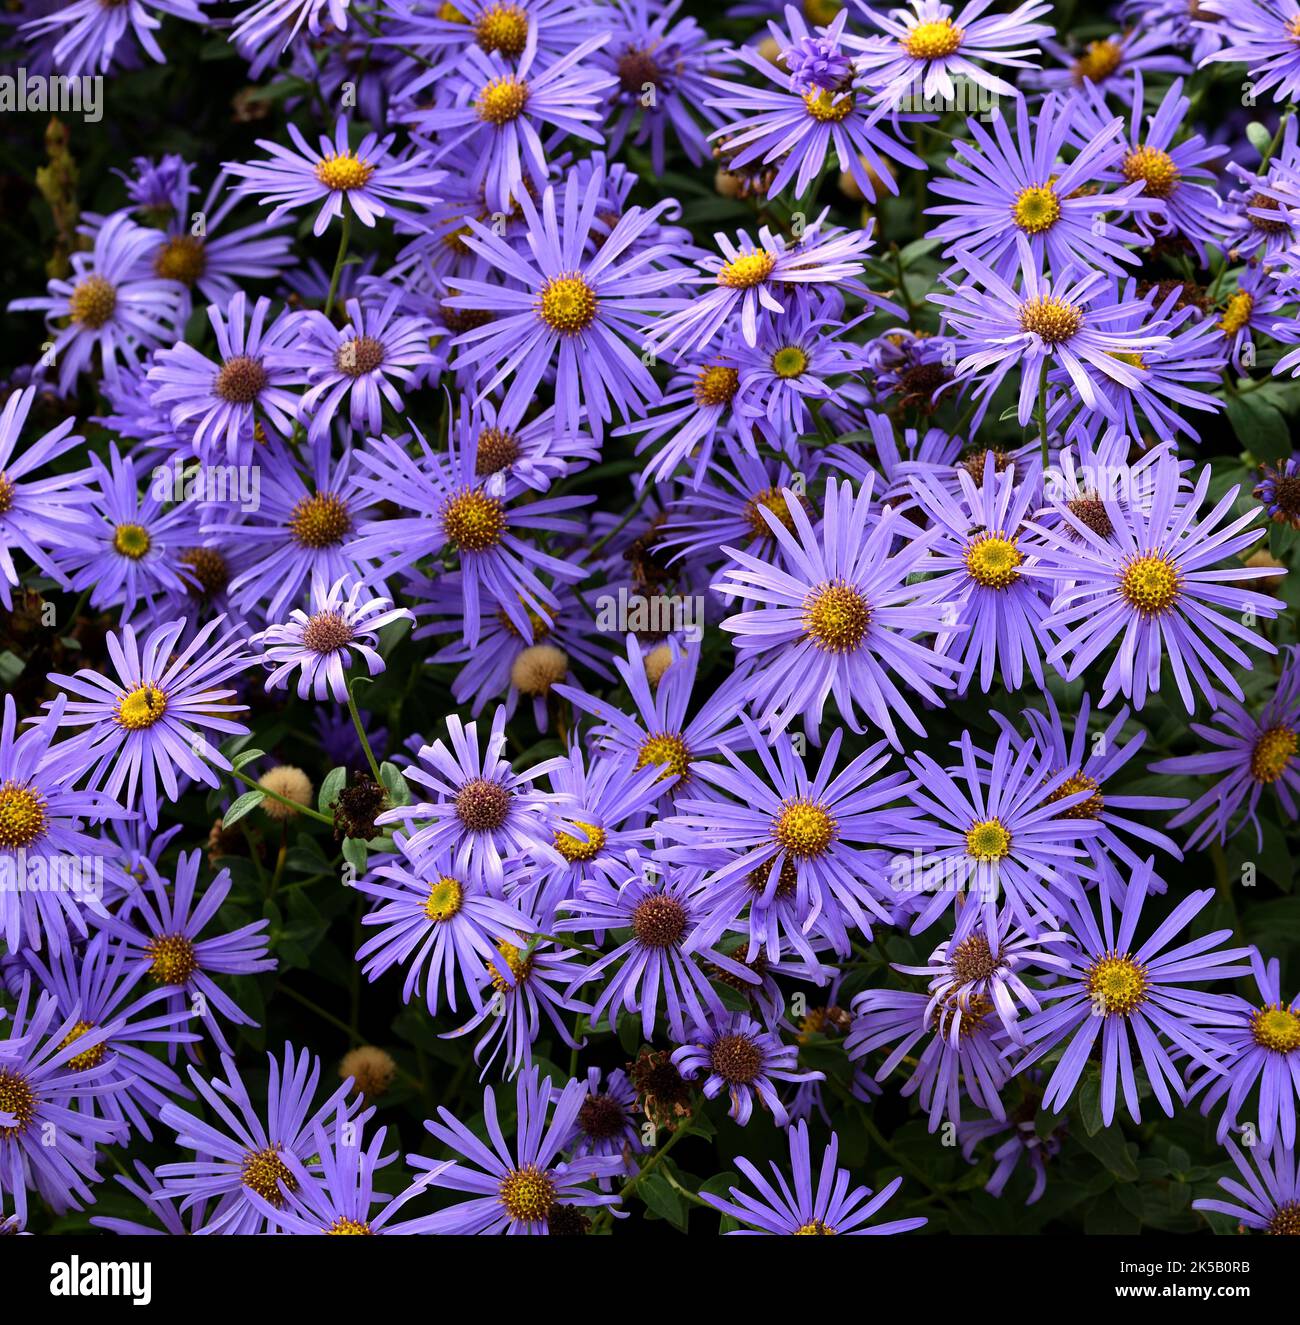 A cluster of the purple flowers of Michaelmas Daisies. Stock Photo